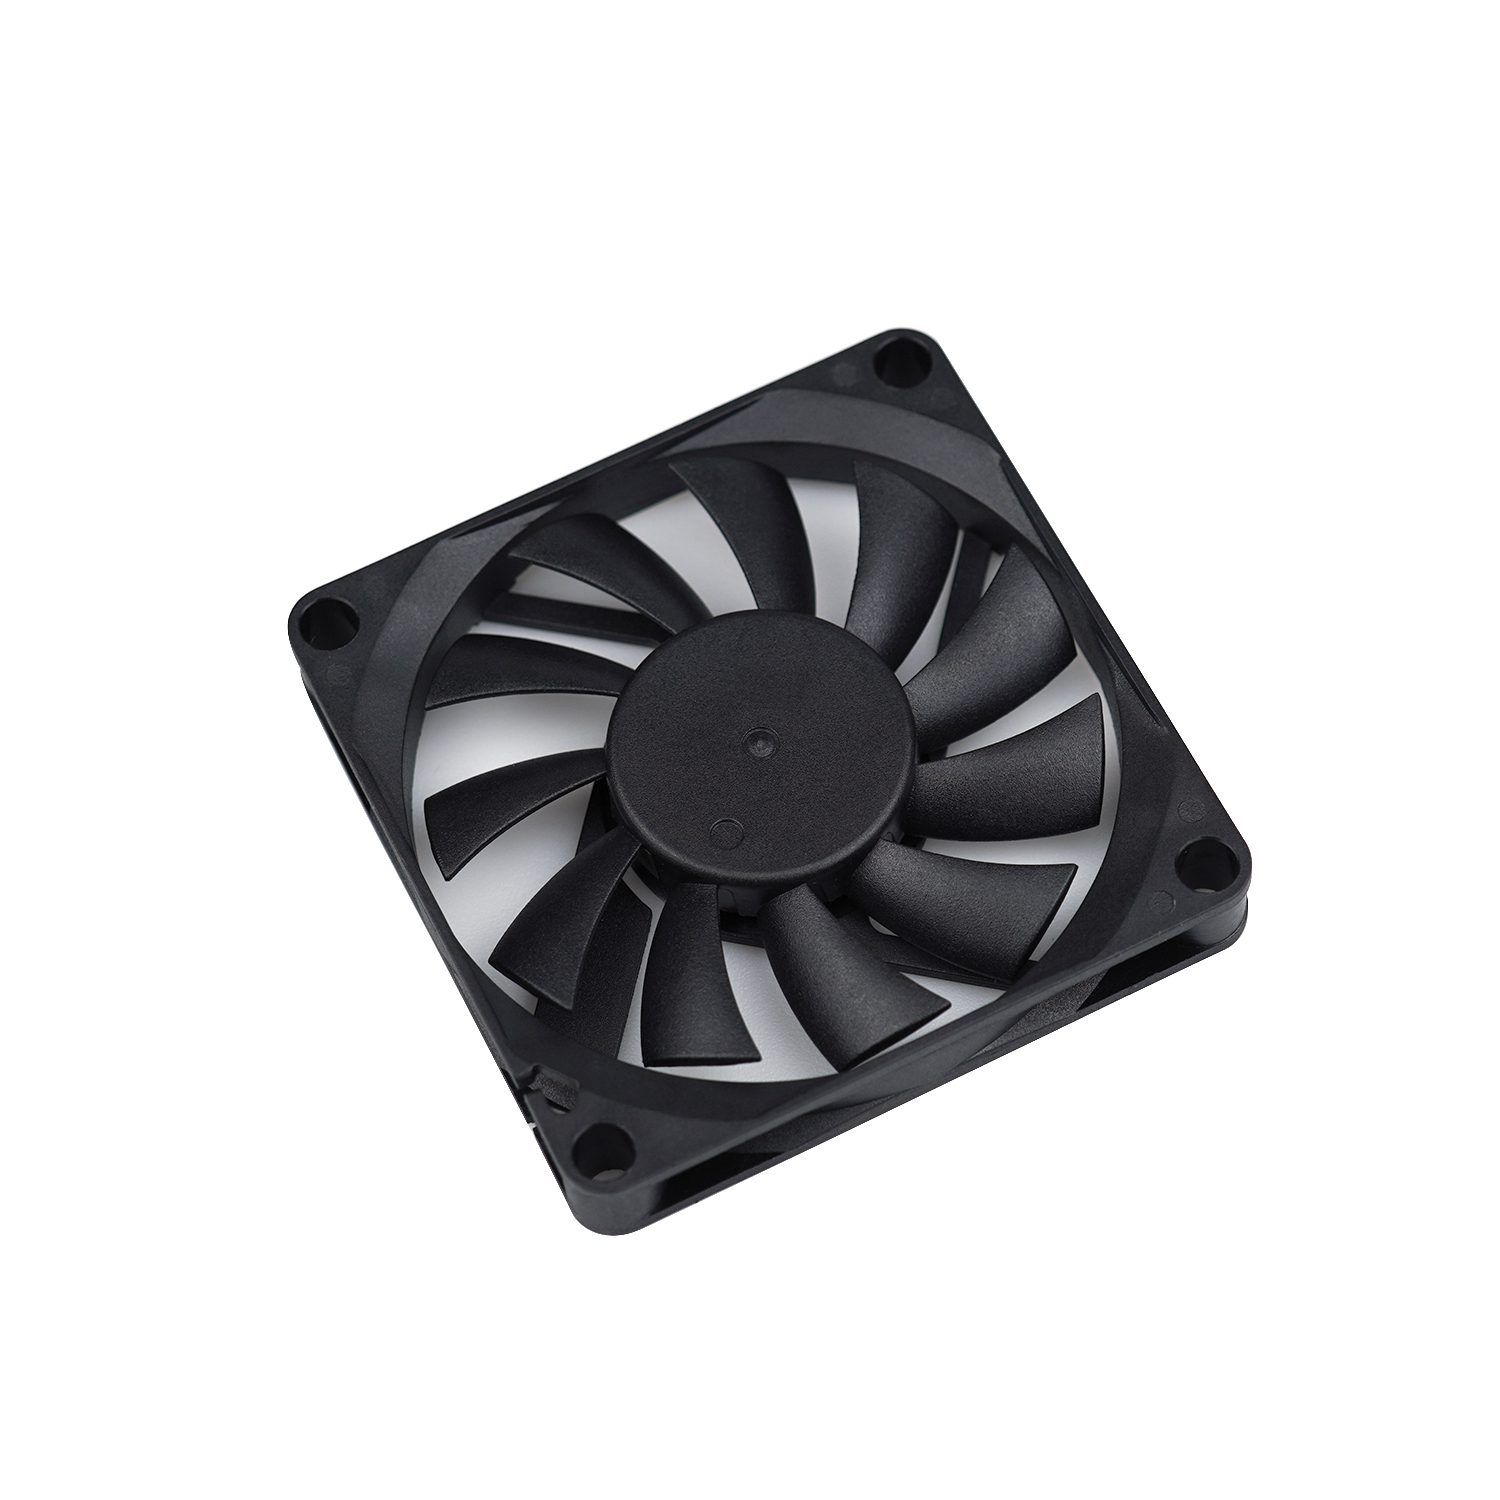  12V 7010 70mm DC Axial Cooling Fan for purifier